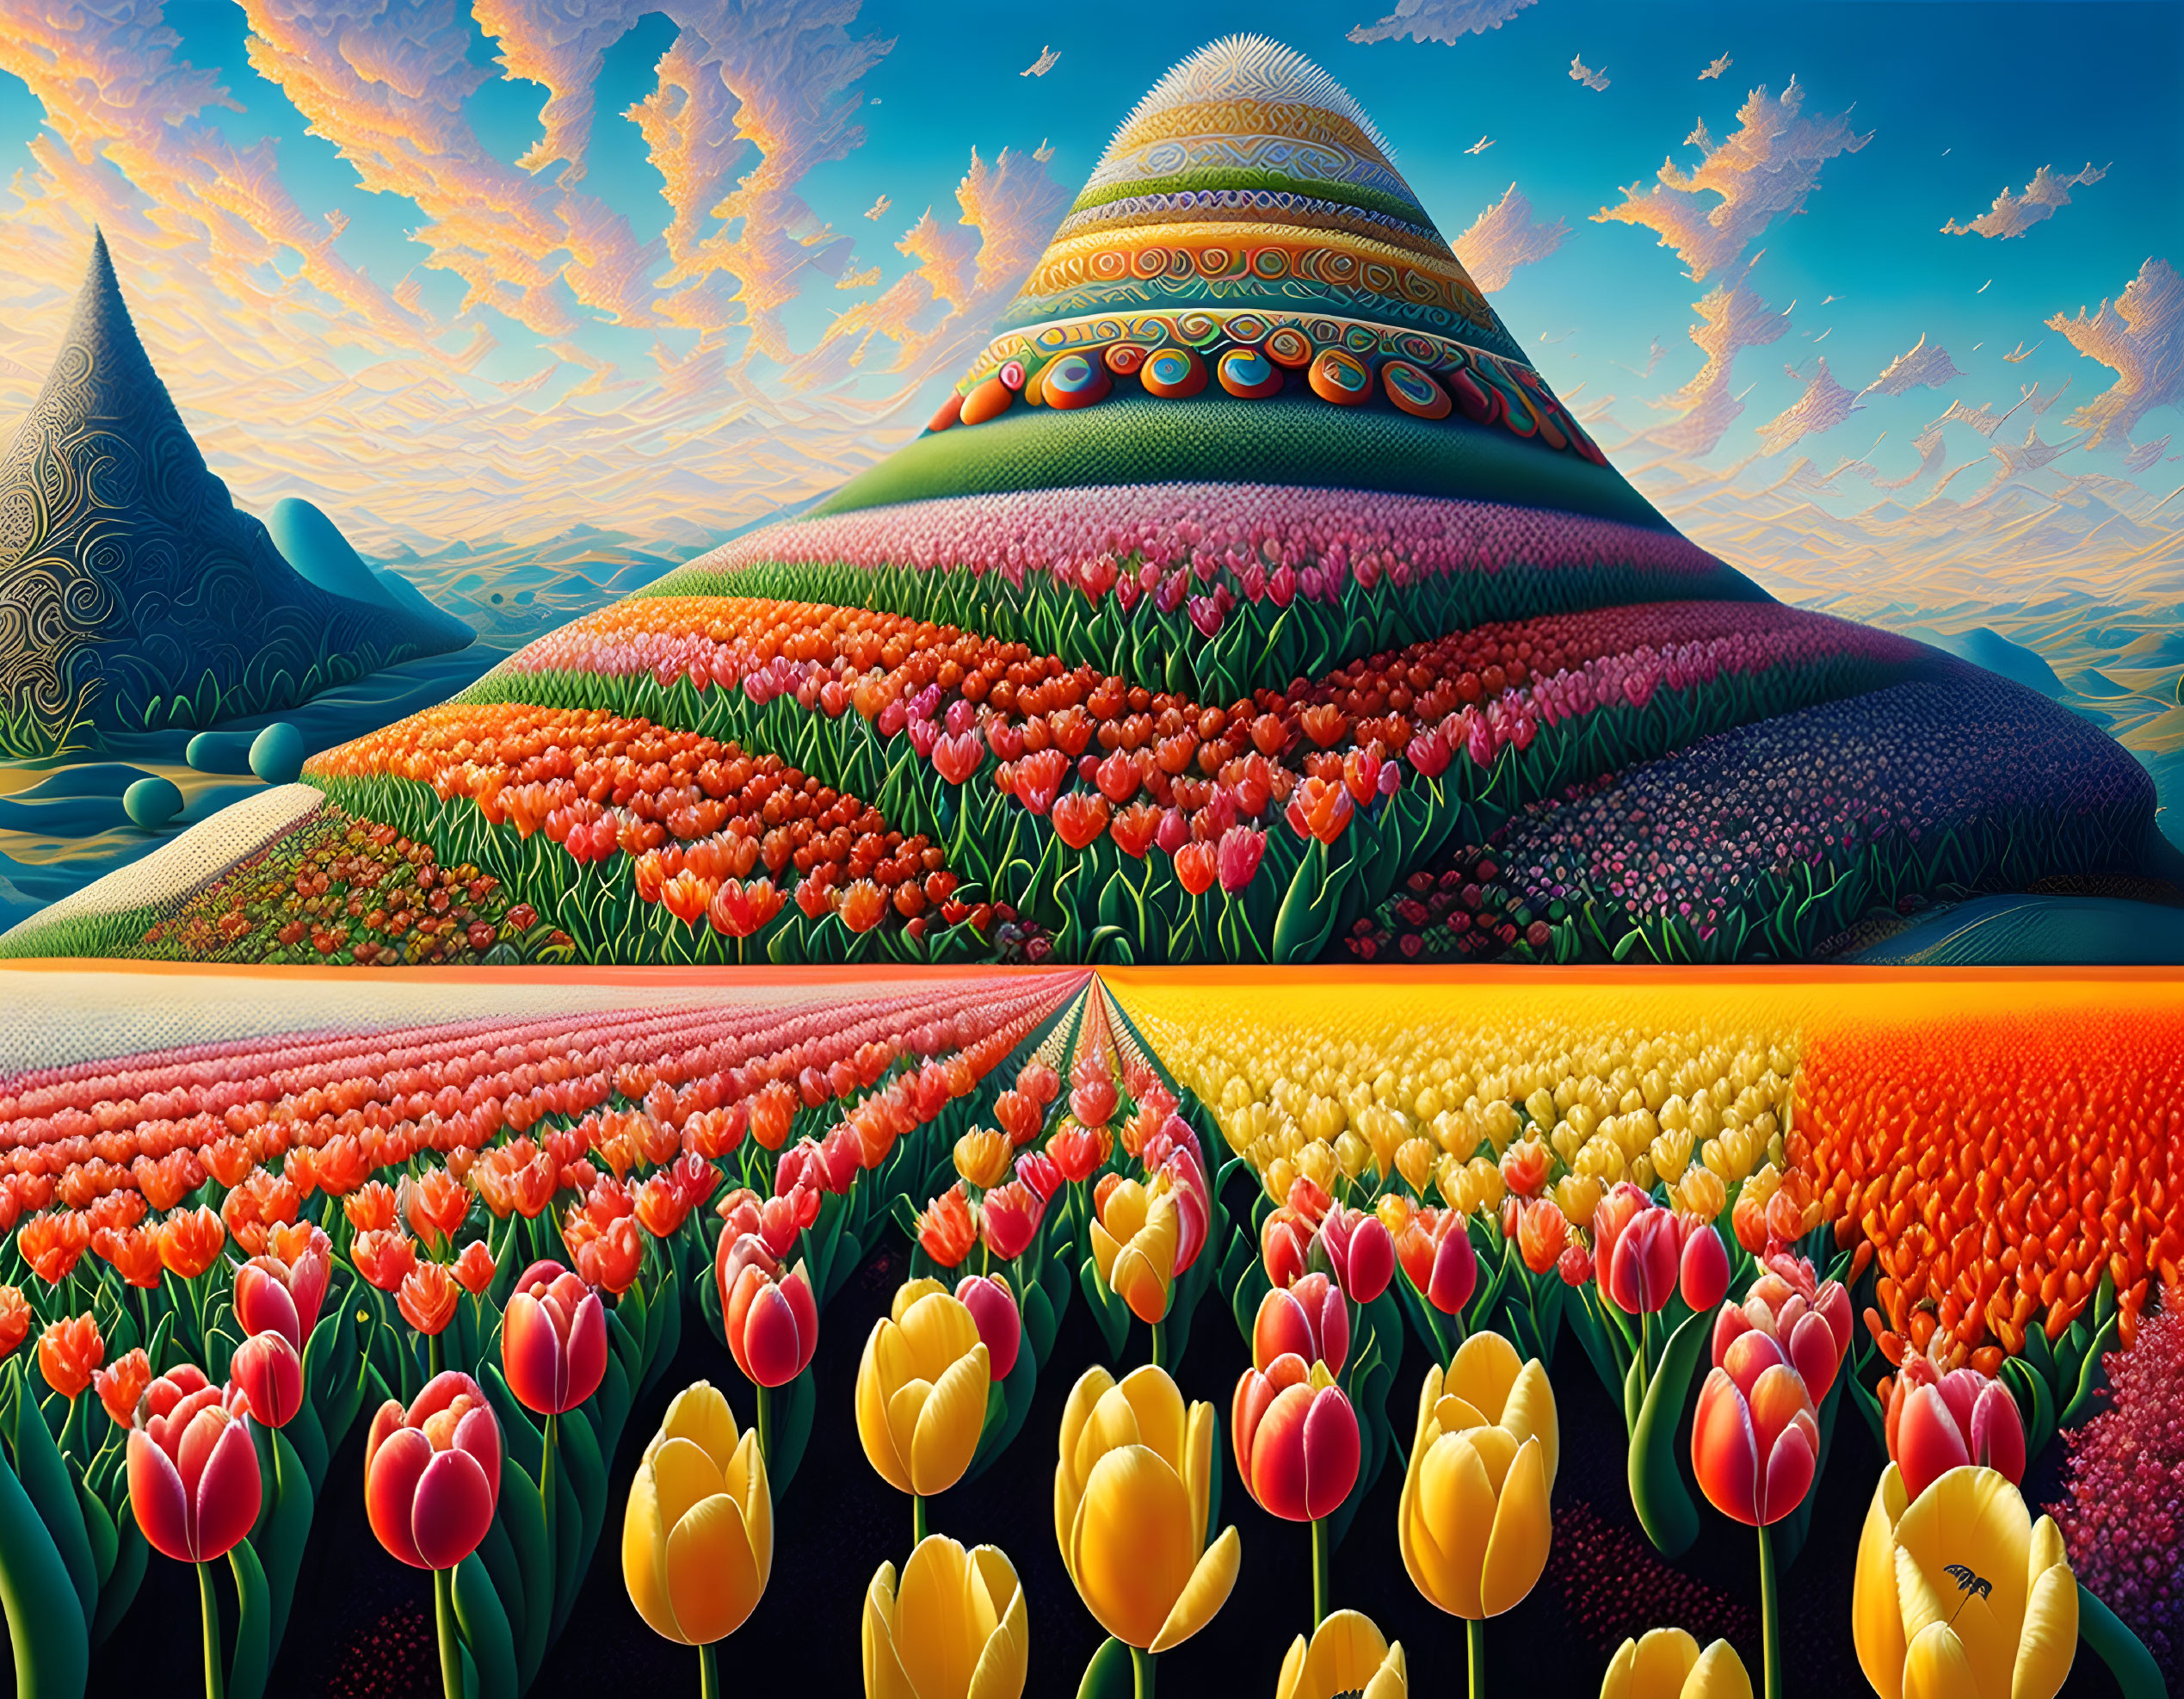 Colorful Tulip Fields and Patterned Hills in Surreal Landscape